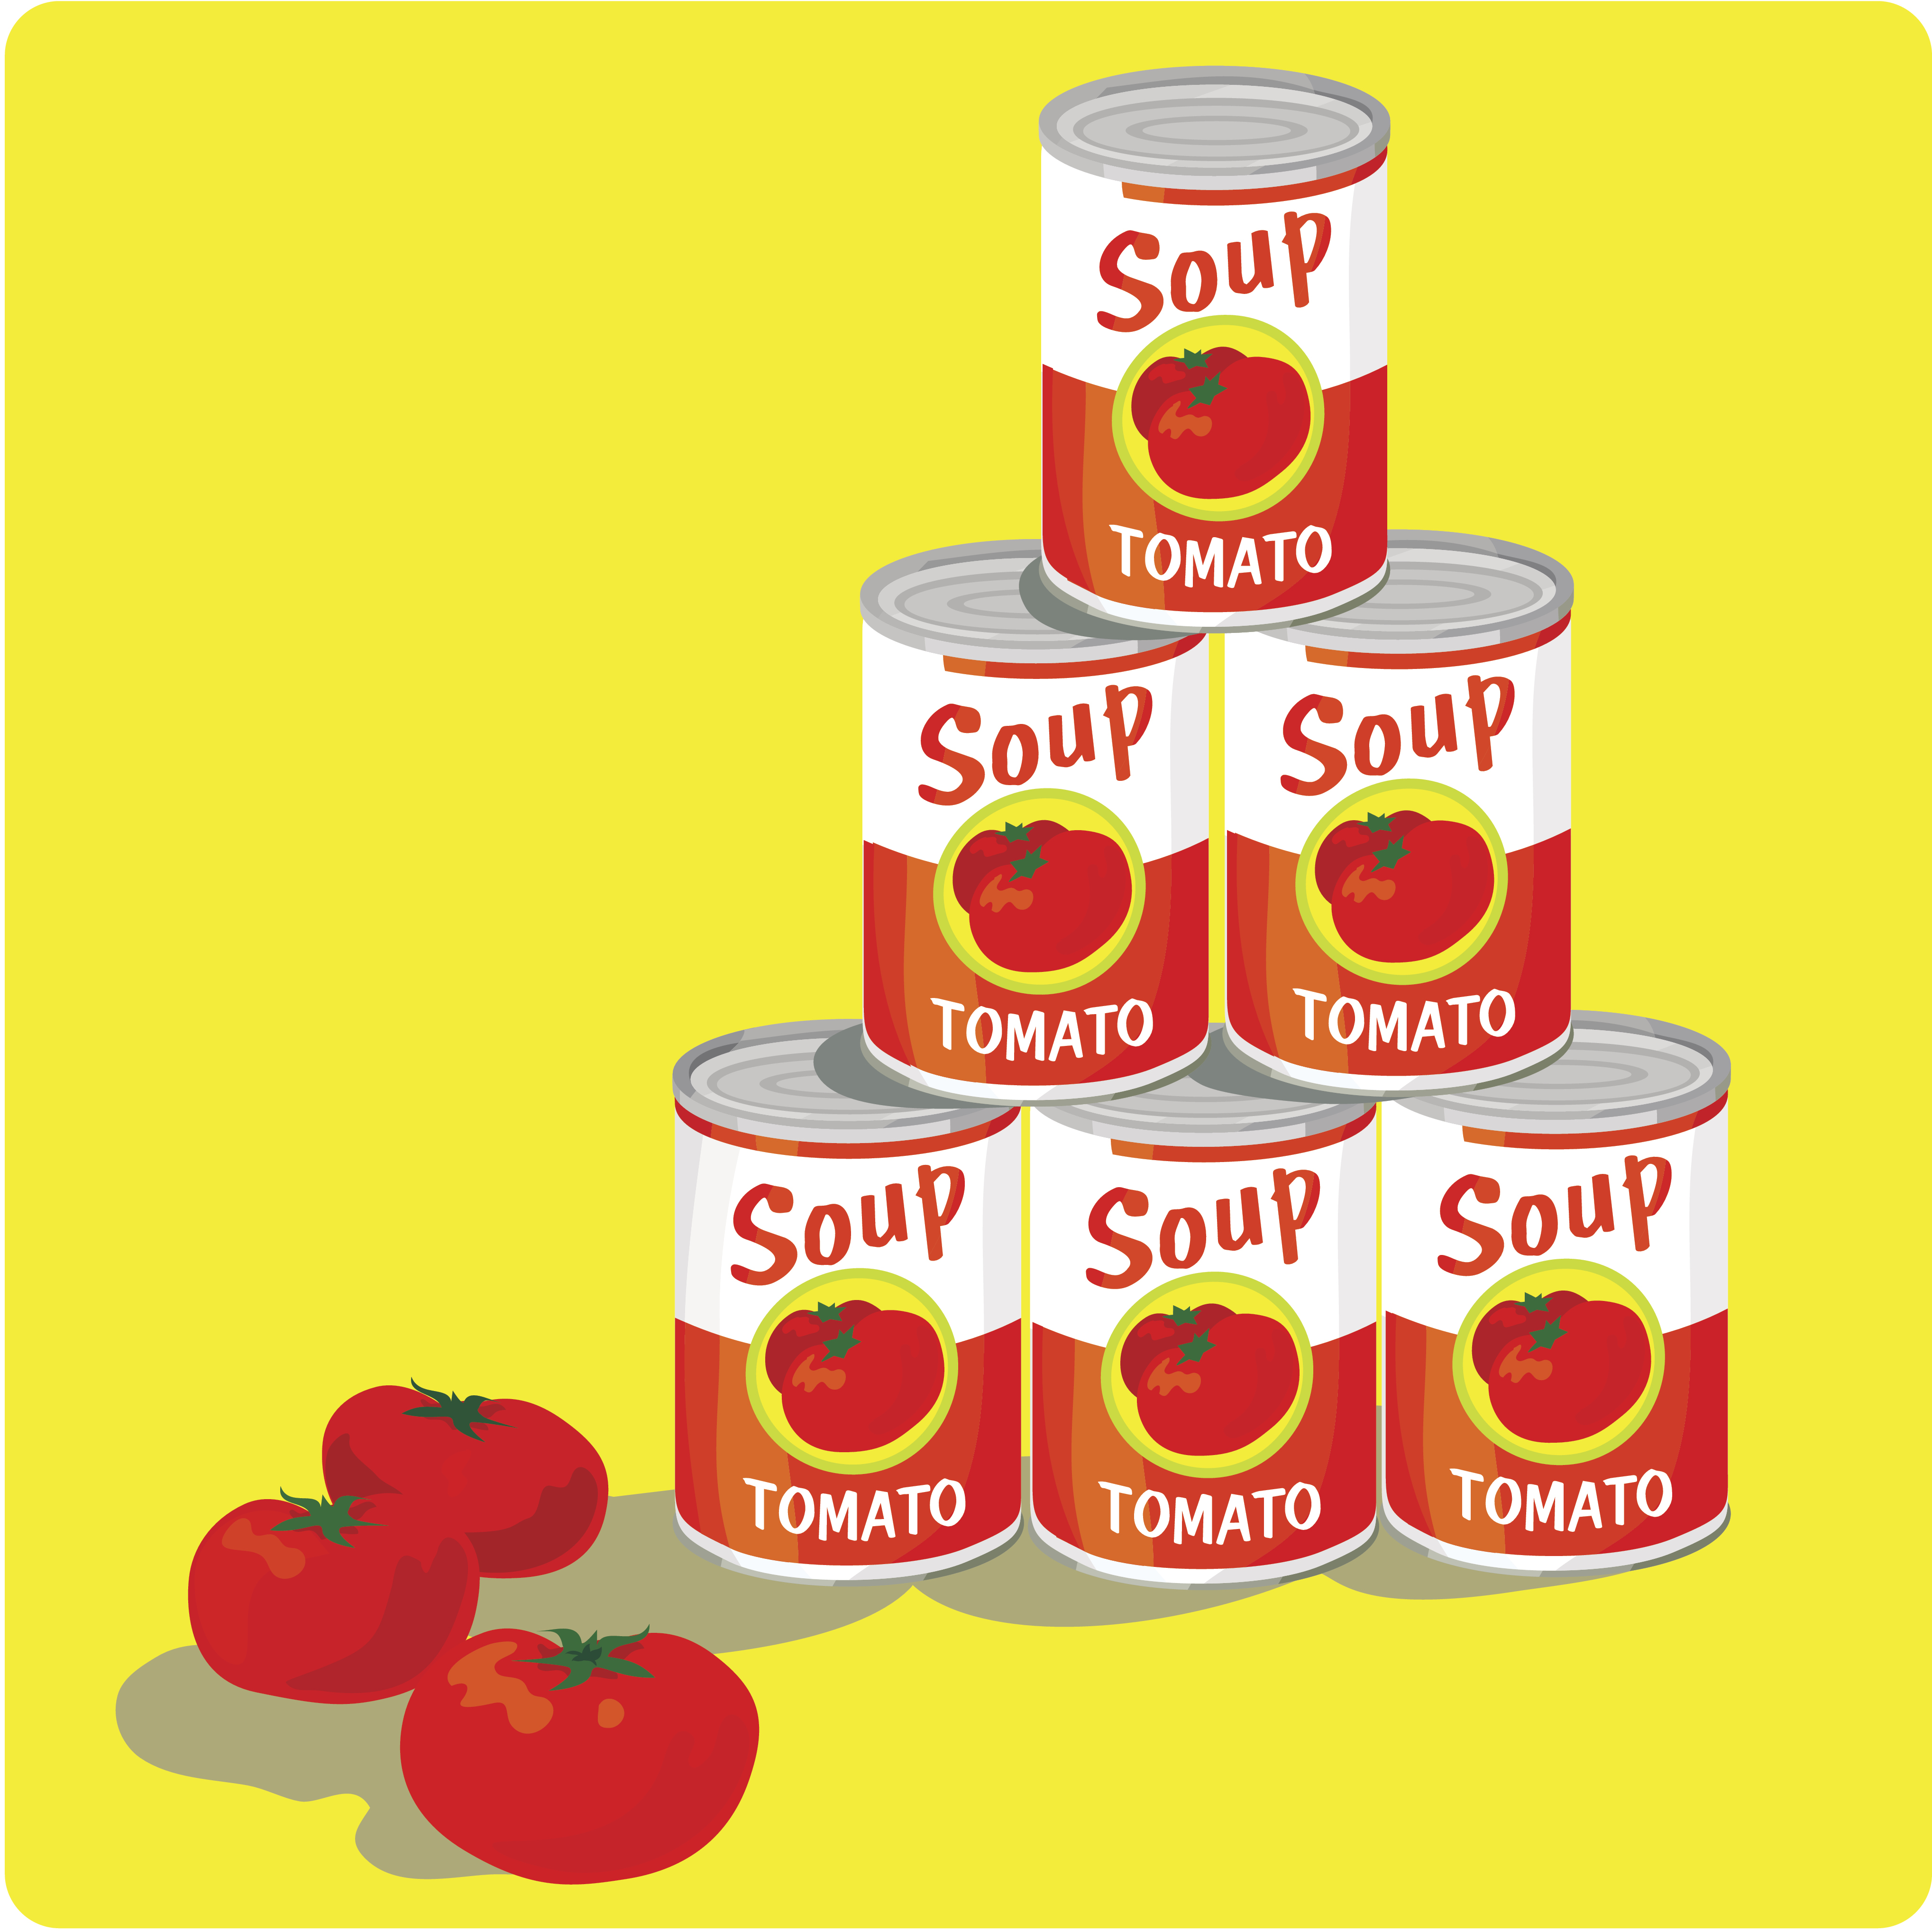 cans of soup stacked on a bright yellow background